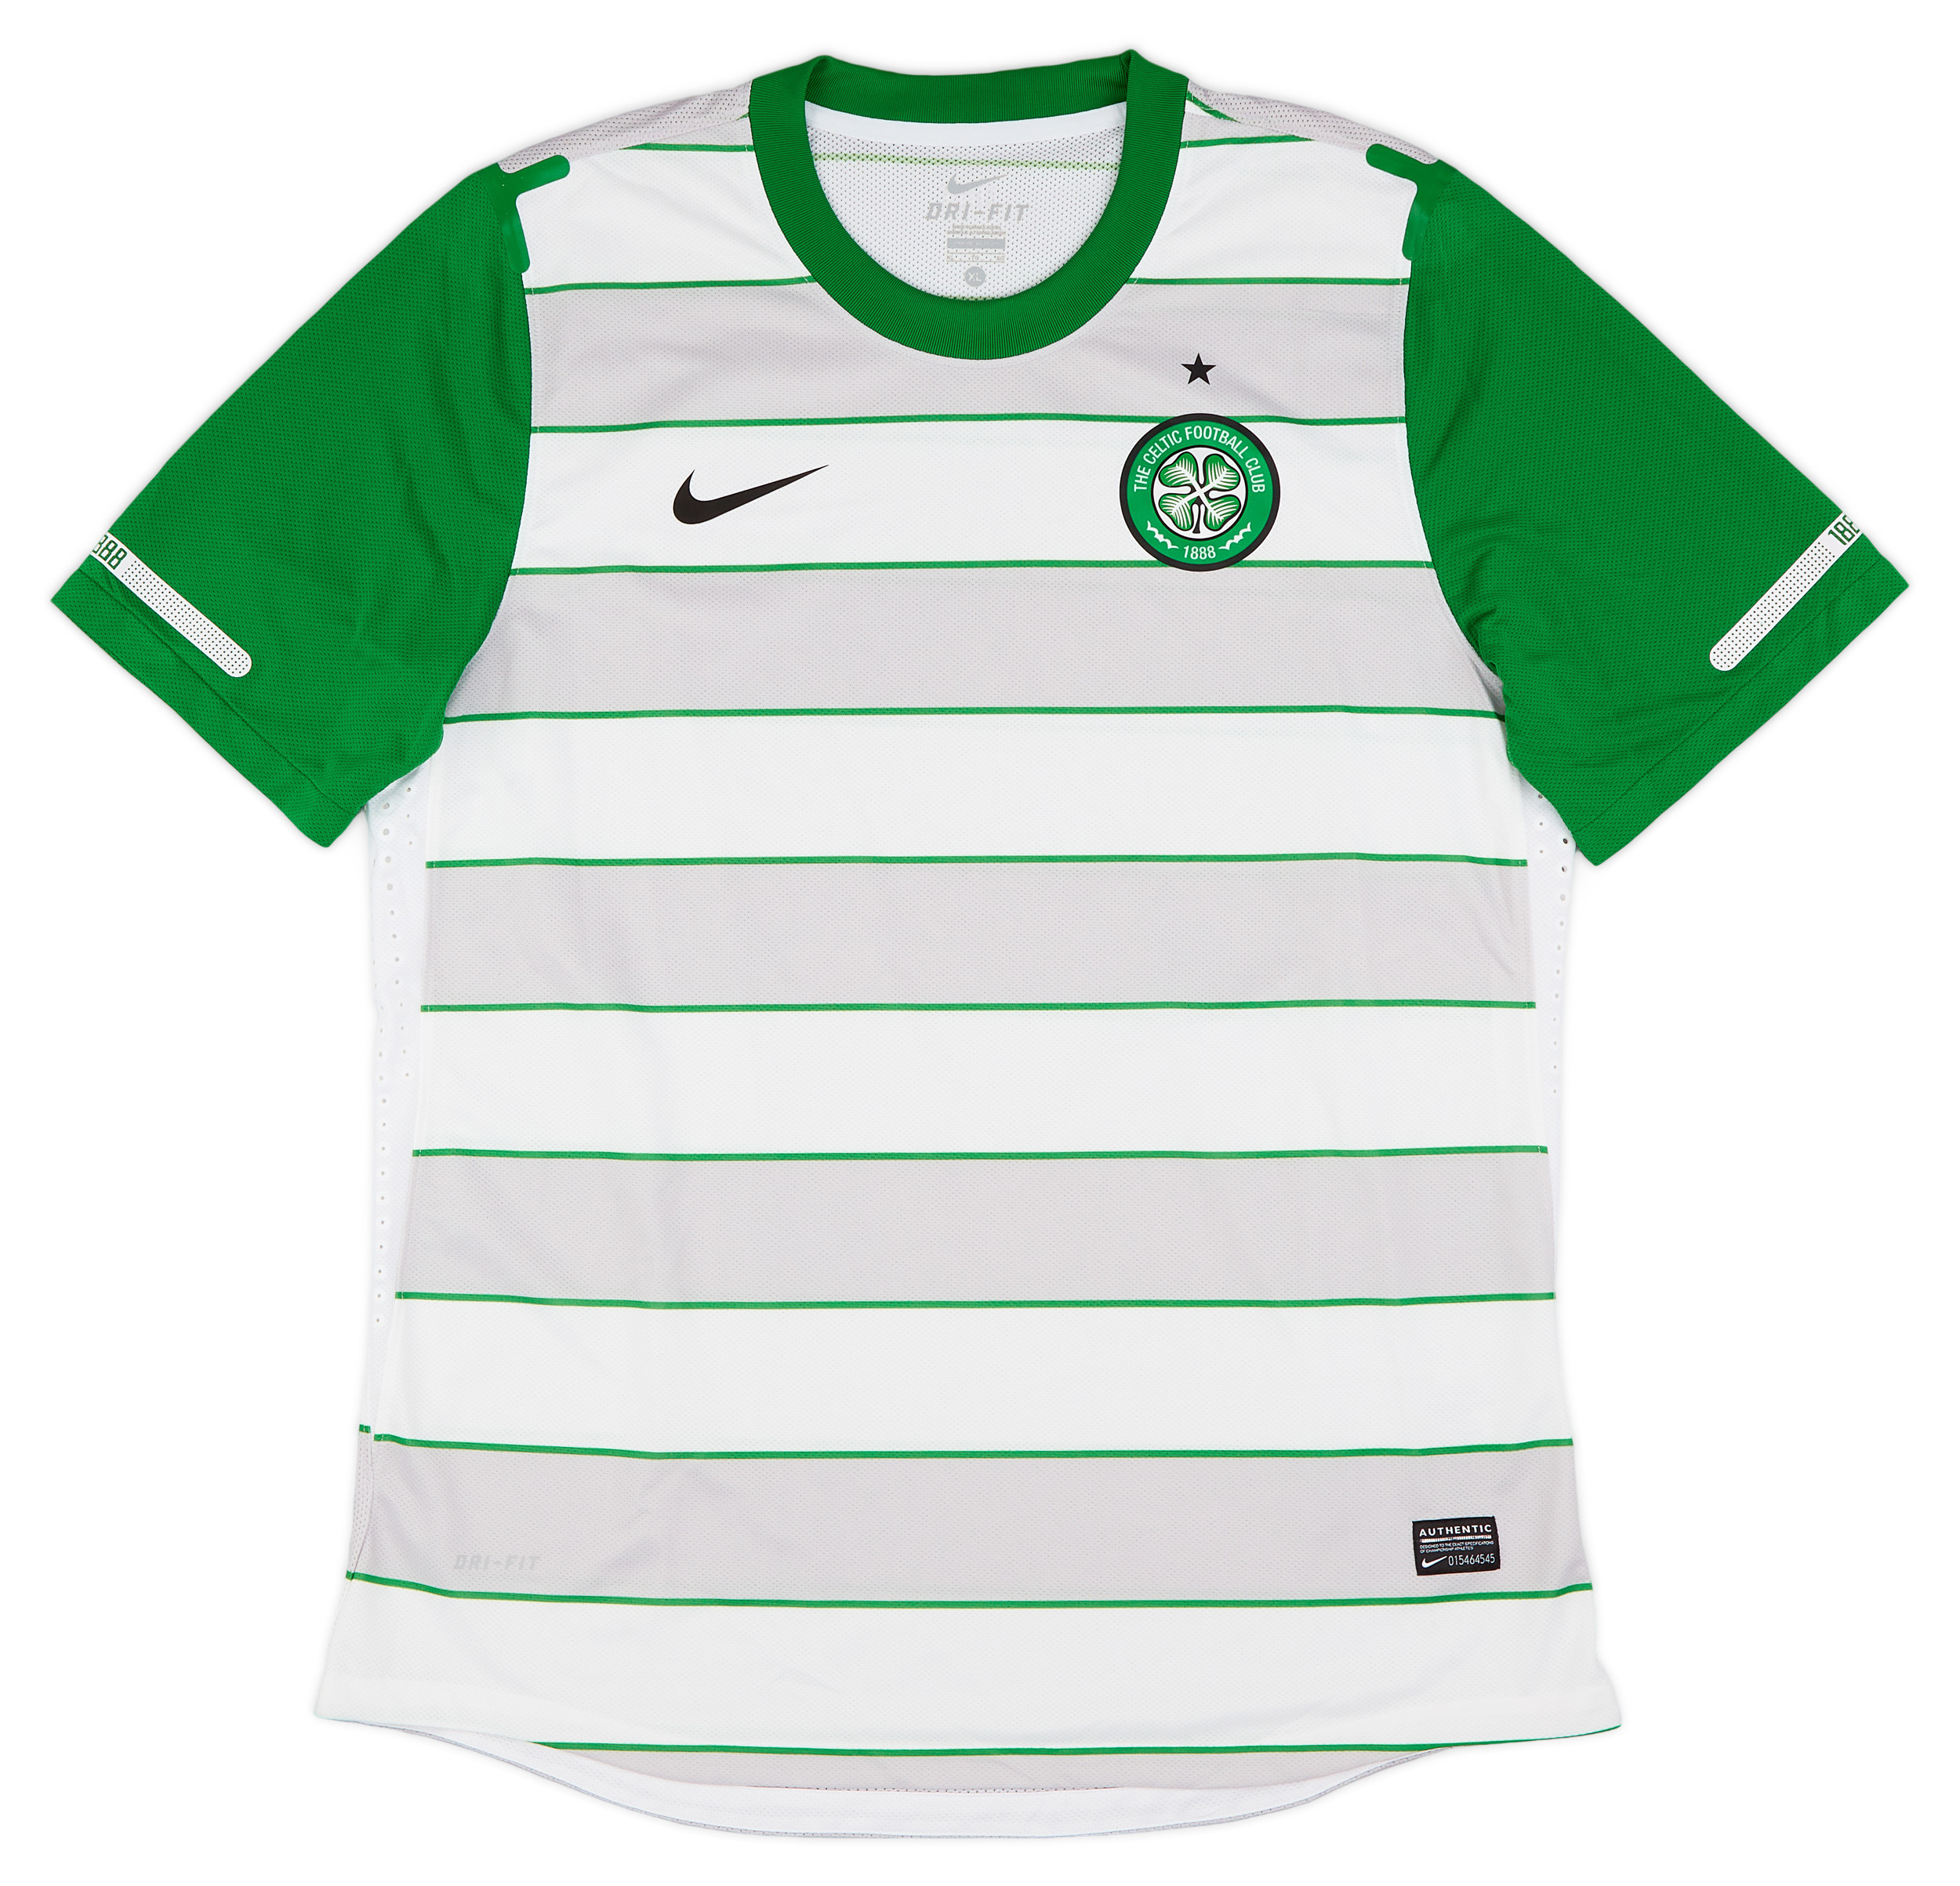 2011-12 Celtic Player Issue Away Shirt - 8/10 - ()